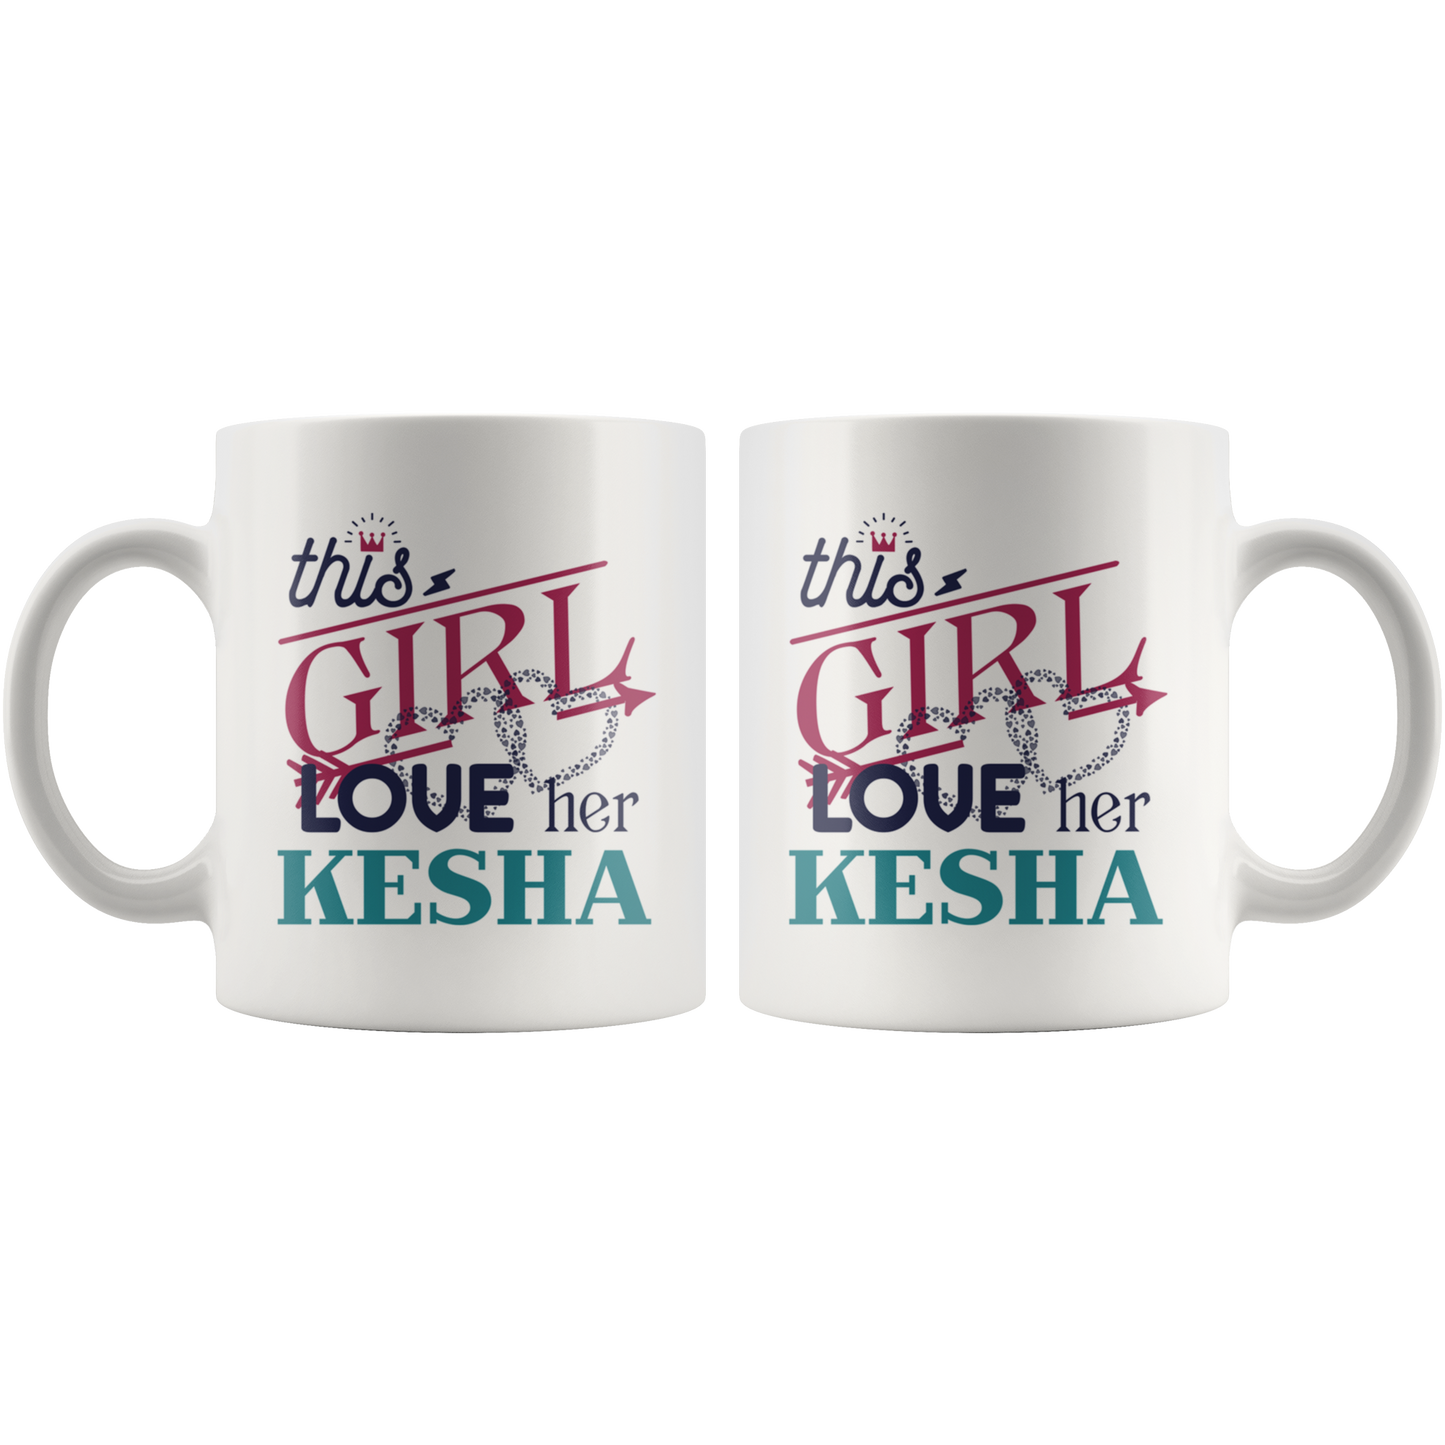 ND20379378-sp-19175 - Funny Mug Gifts For Her, Wife - This Girl Love Her Husband K